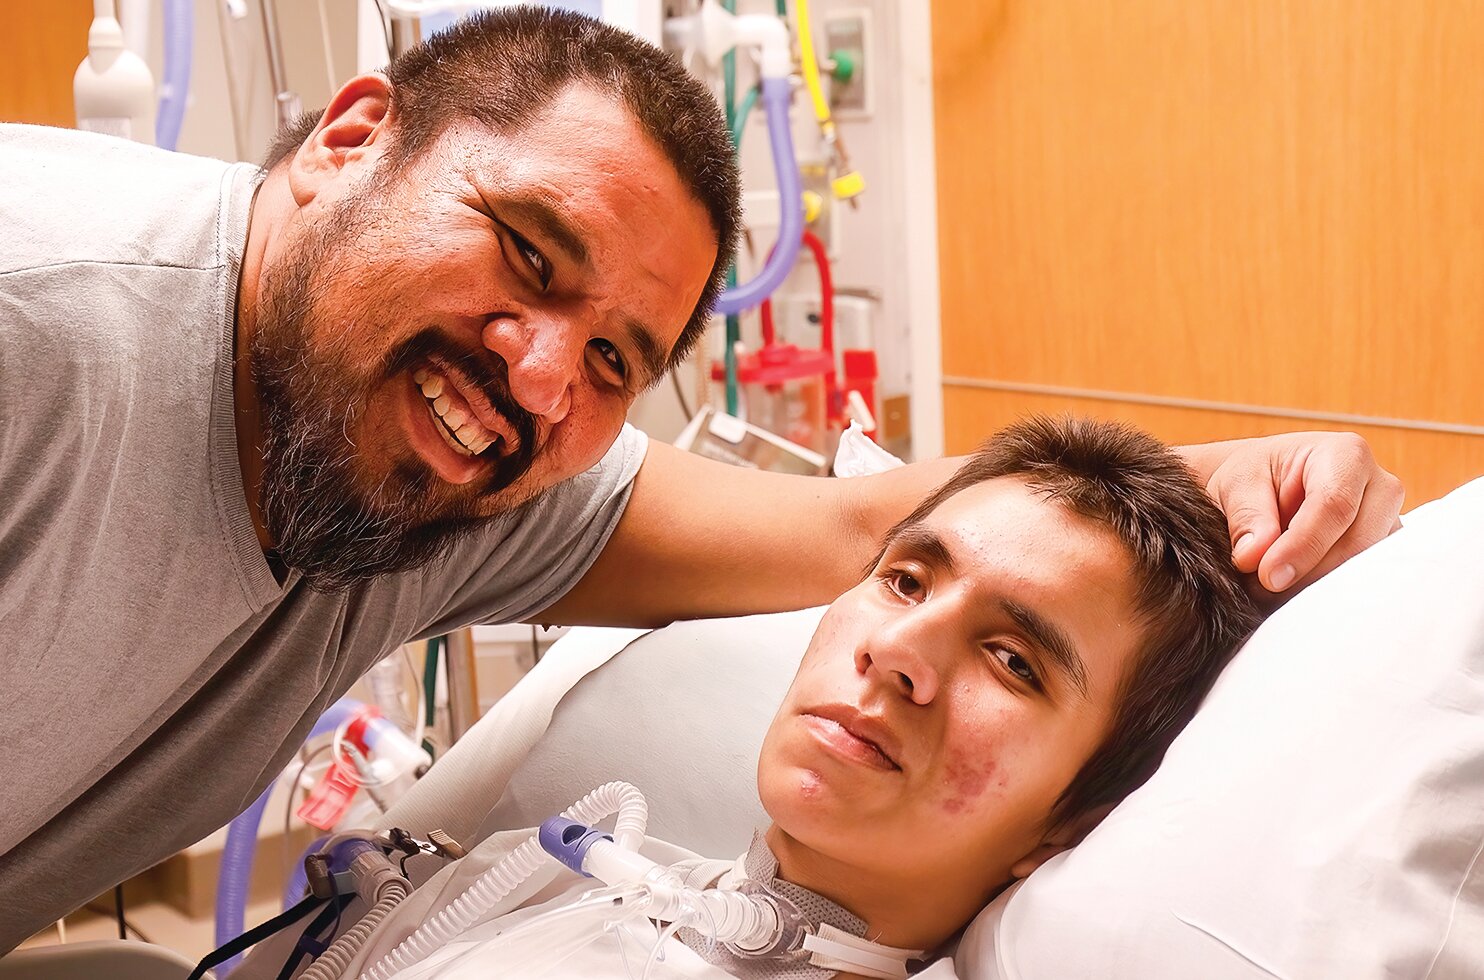 Chuck Goggleye remains upbeat over his son Matthew’s slow recovery from last year’s car crash.